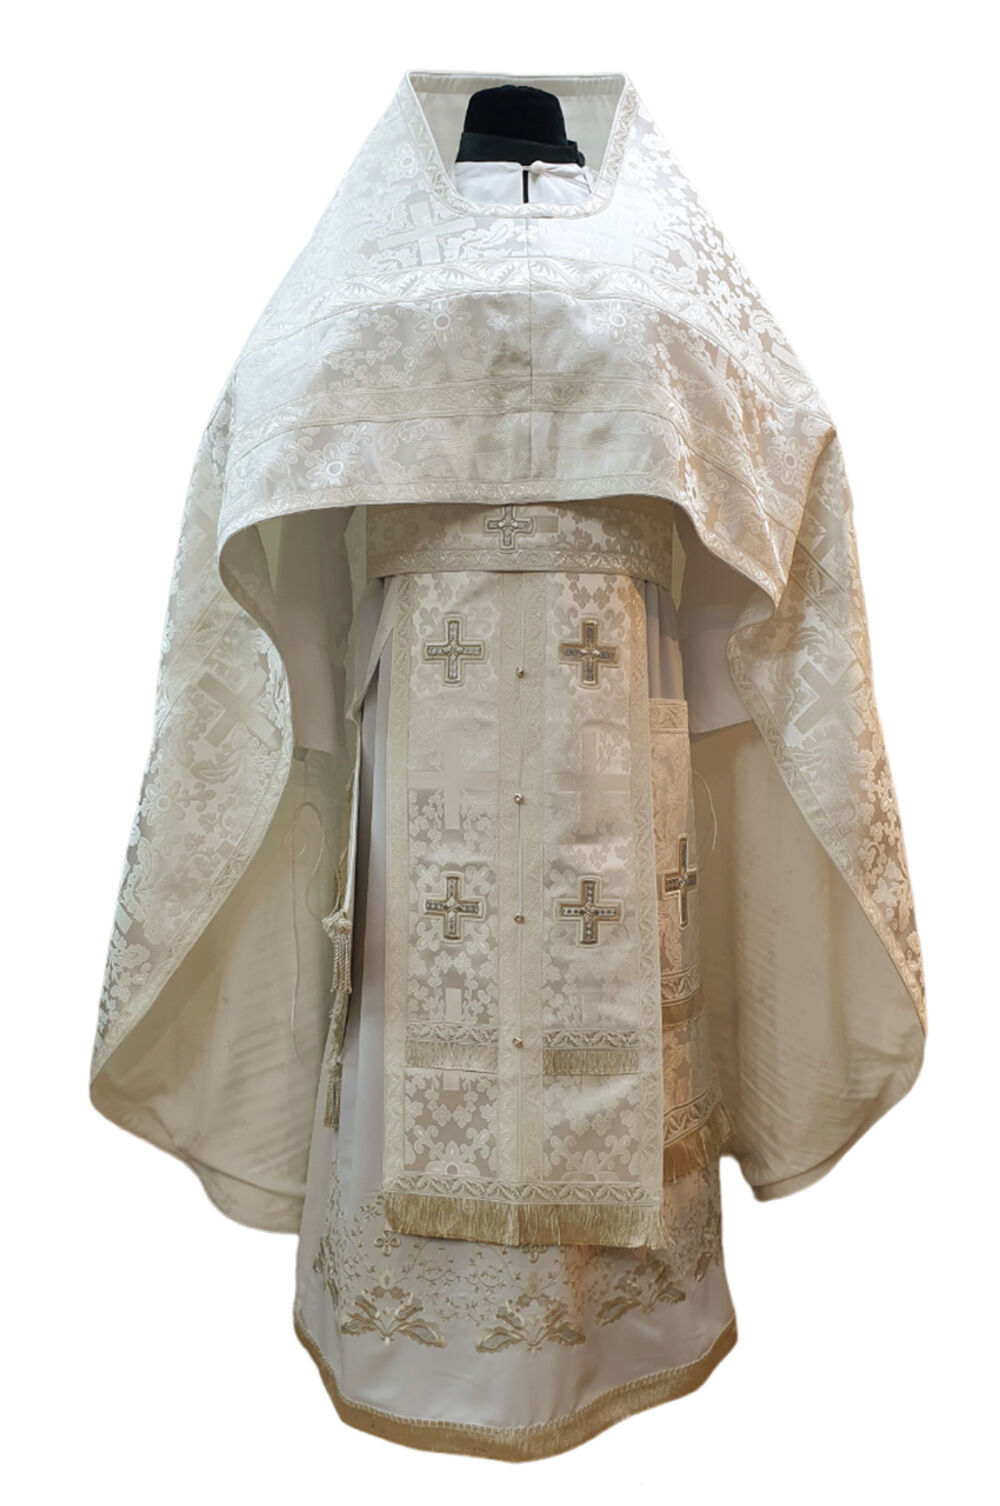 Russian style priest vestments